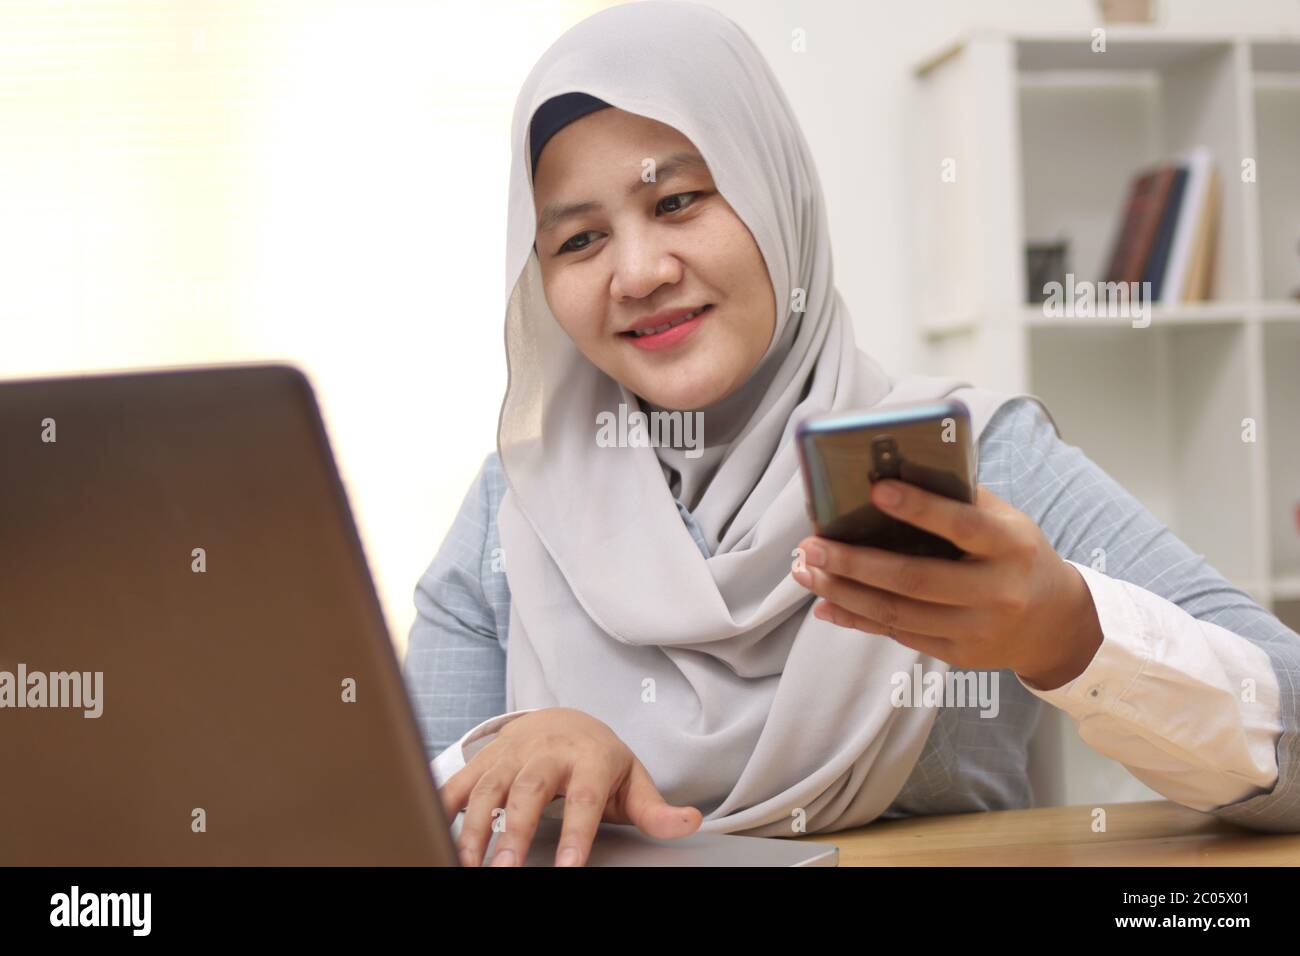 Asian muslim woman work in office, using phone and laptop, happy smiling facial expression, online shopping purchase check out Stock Photo